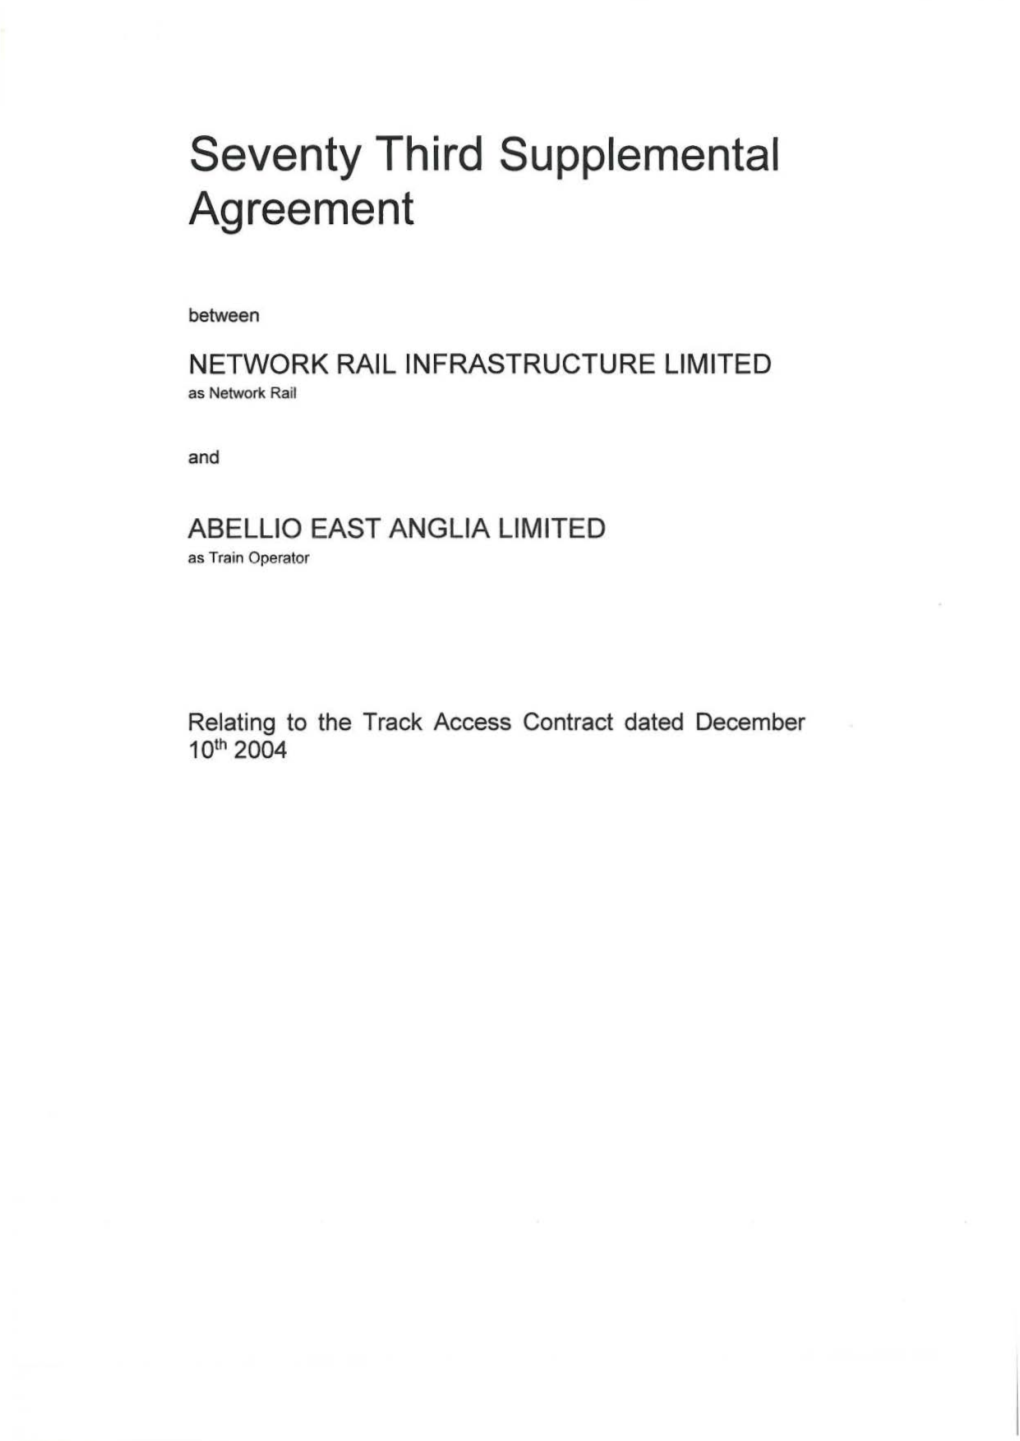 Abellio East Anglia Limited 73Rd Supplemental Agreement